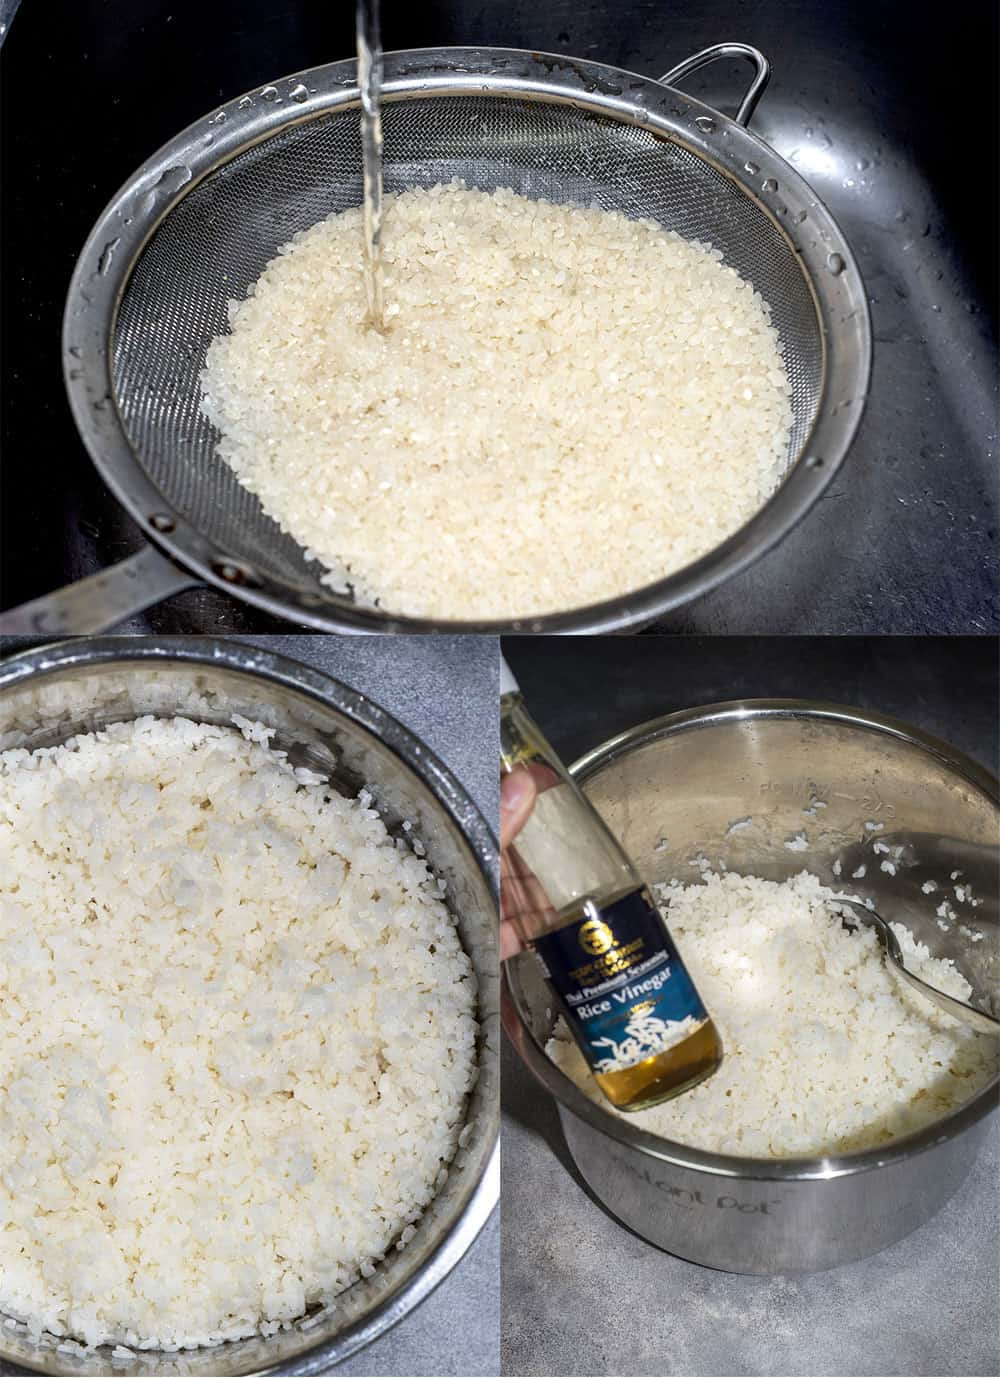 how to make sushi rice